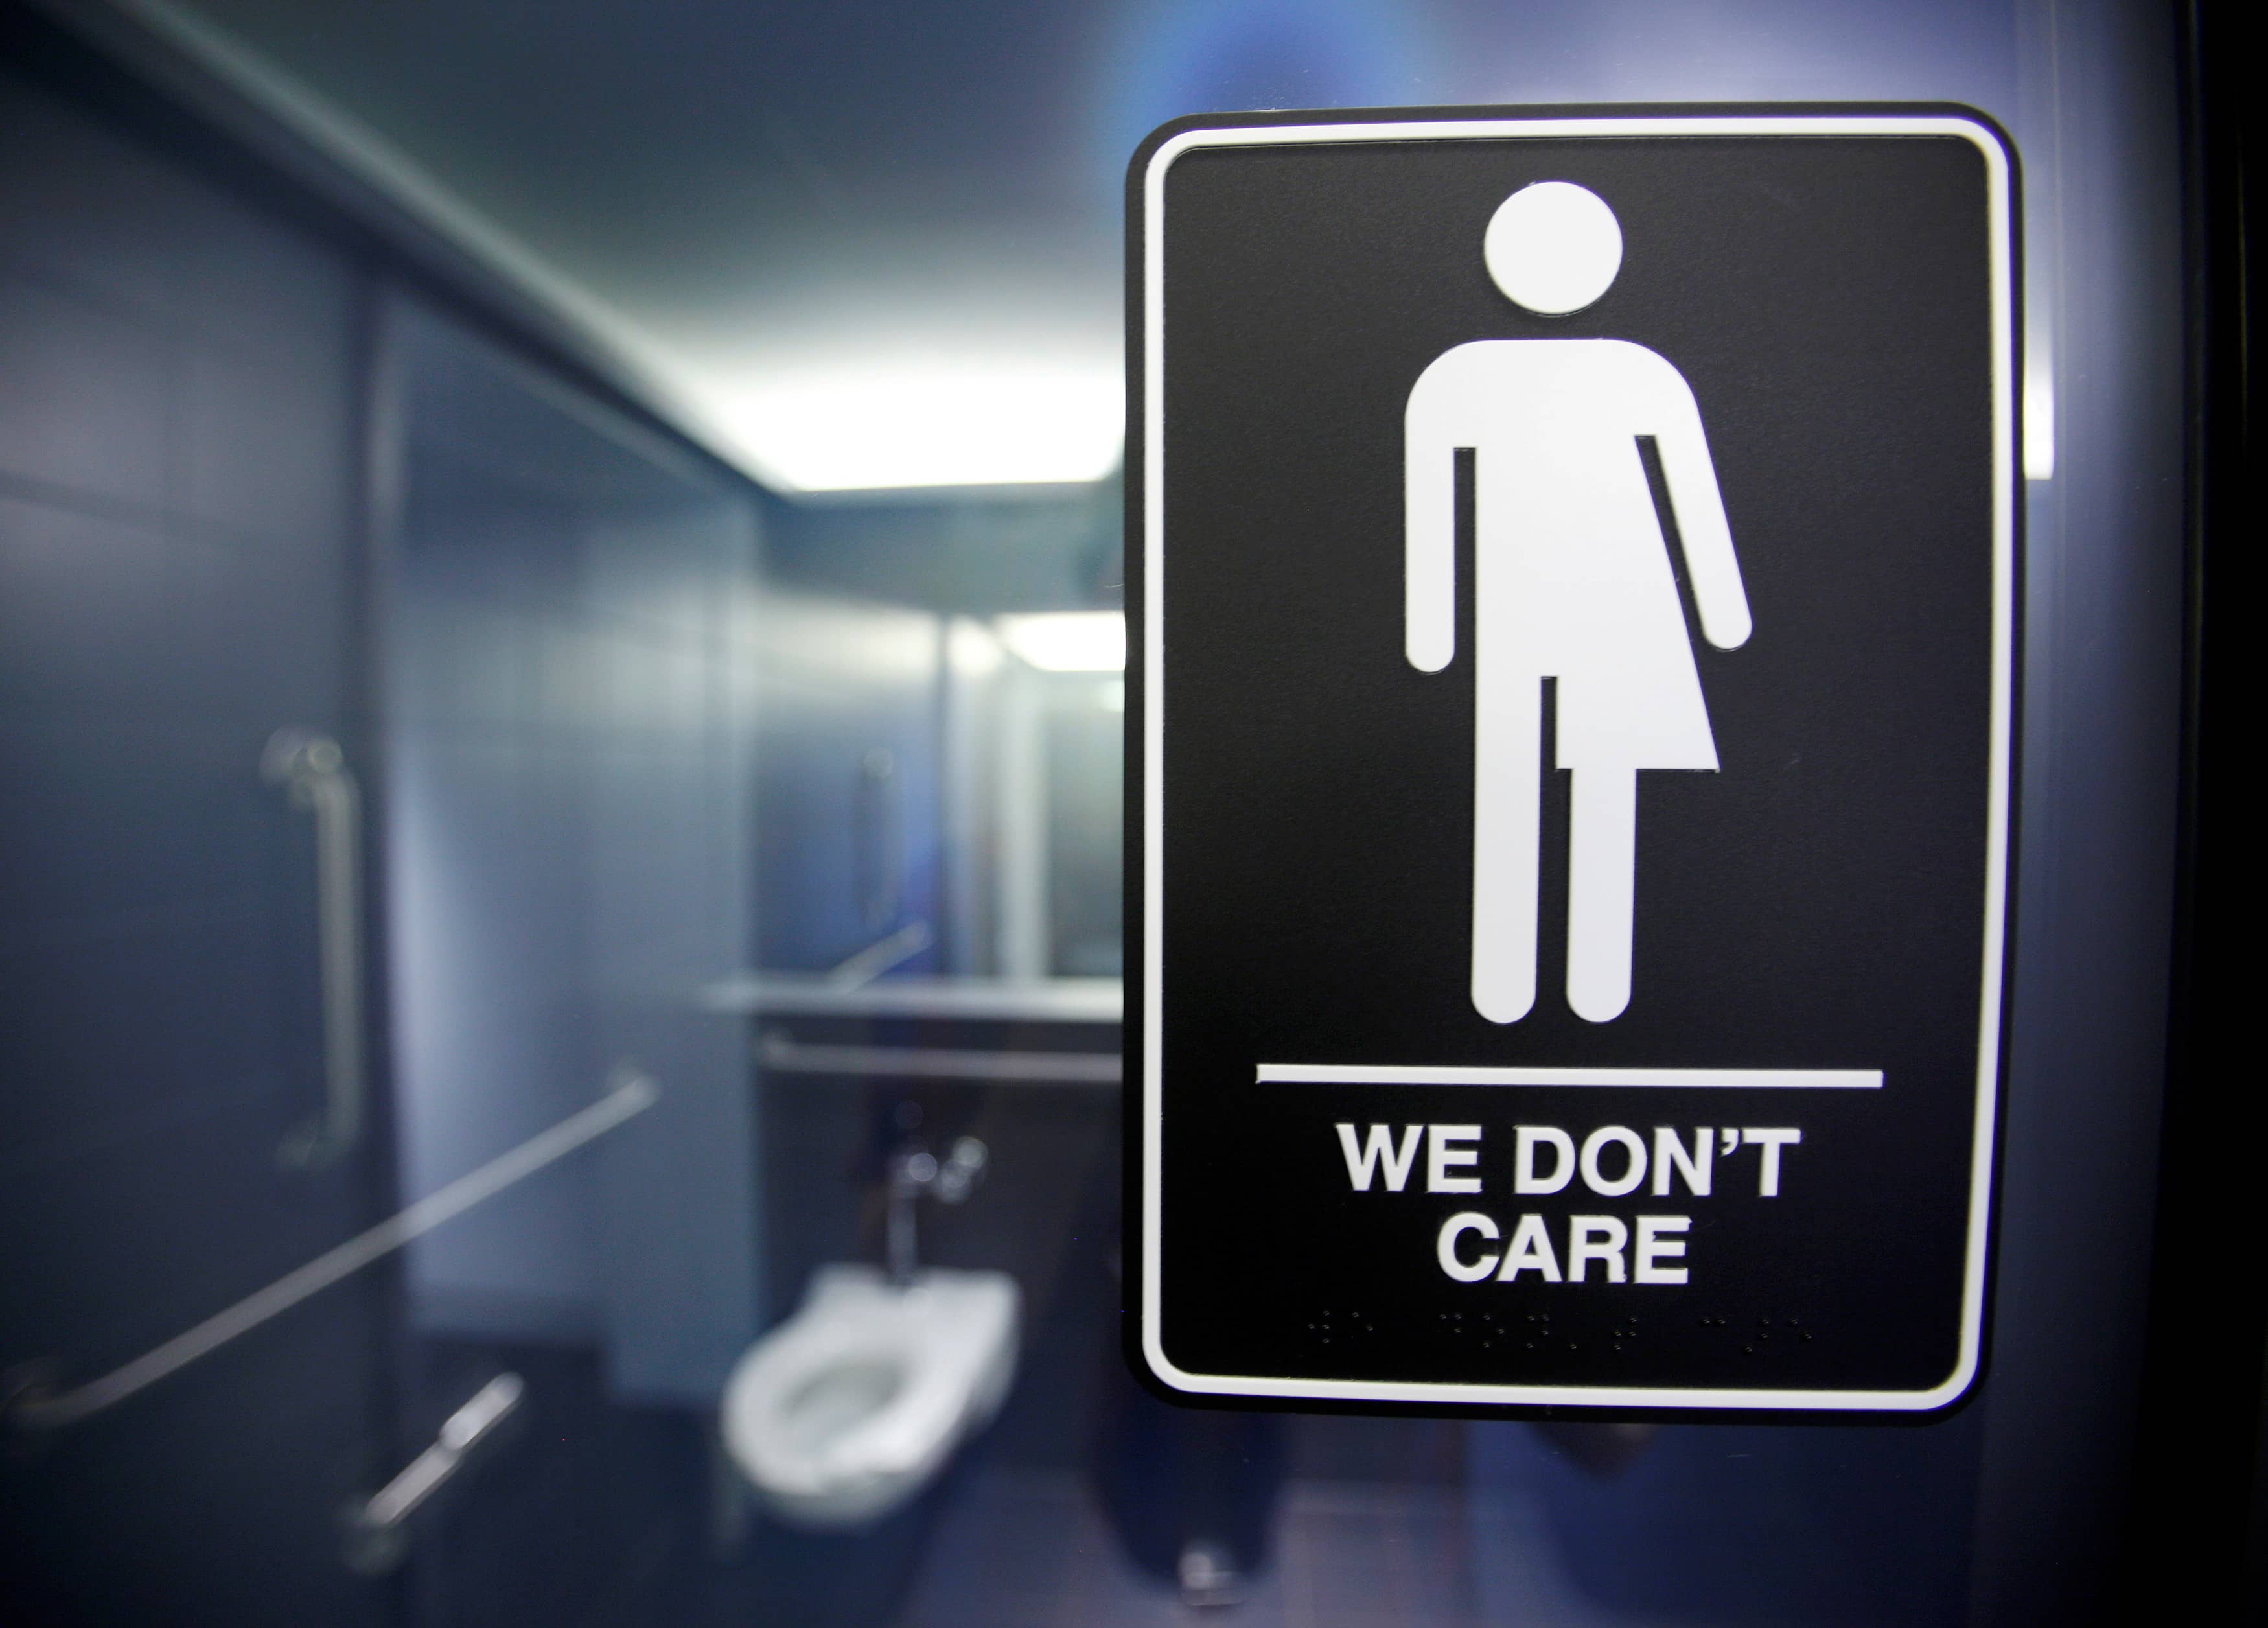 file-photo-of-a-sign-protesting-a-recent-north-carolina-law-restricting-transgender-bathroom-access-adorns-one-of-the-stalls-at-the-21c-museum-hotel-in-durham-north-carolina